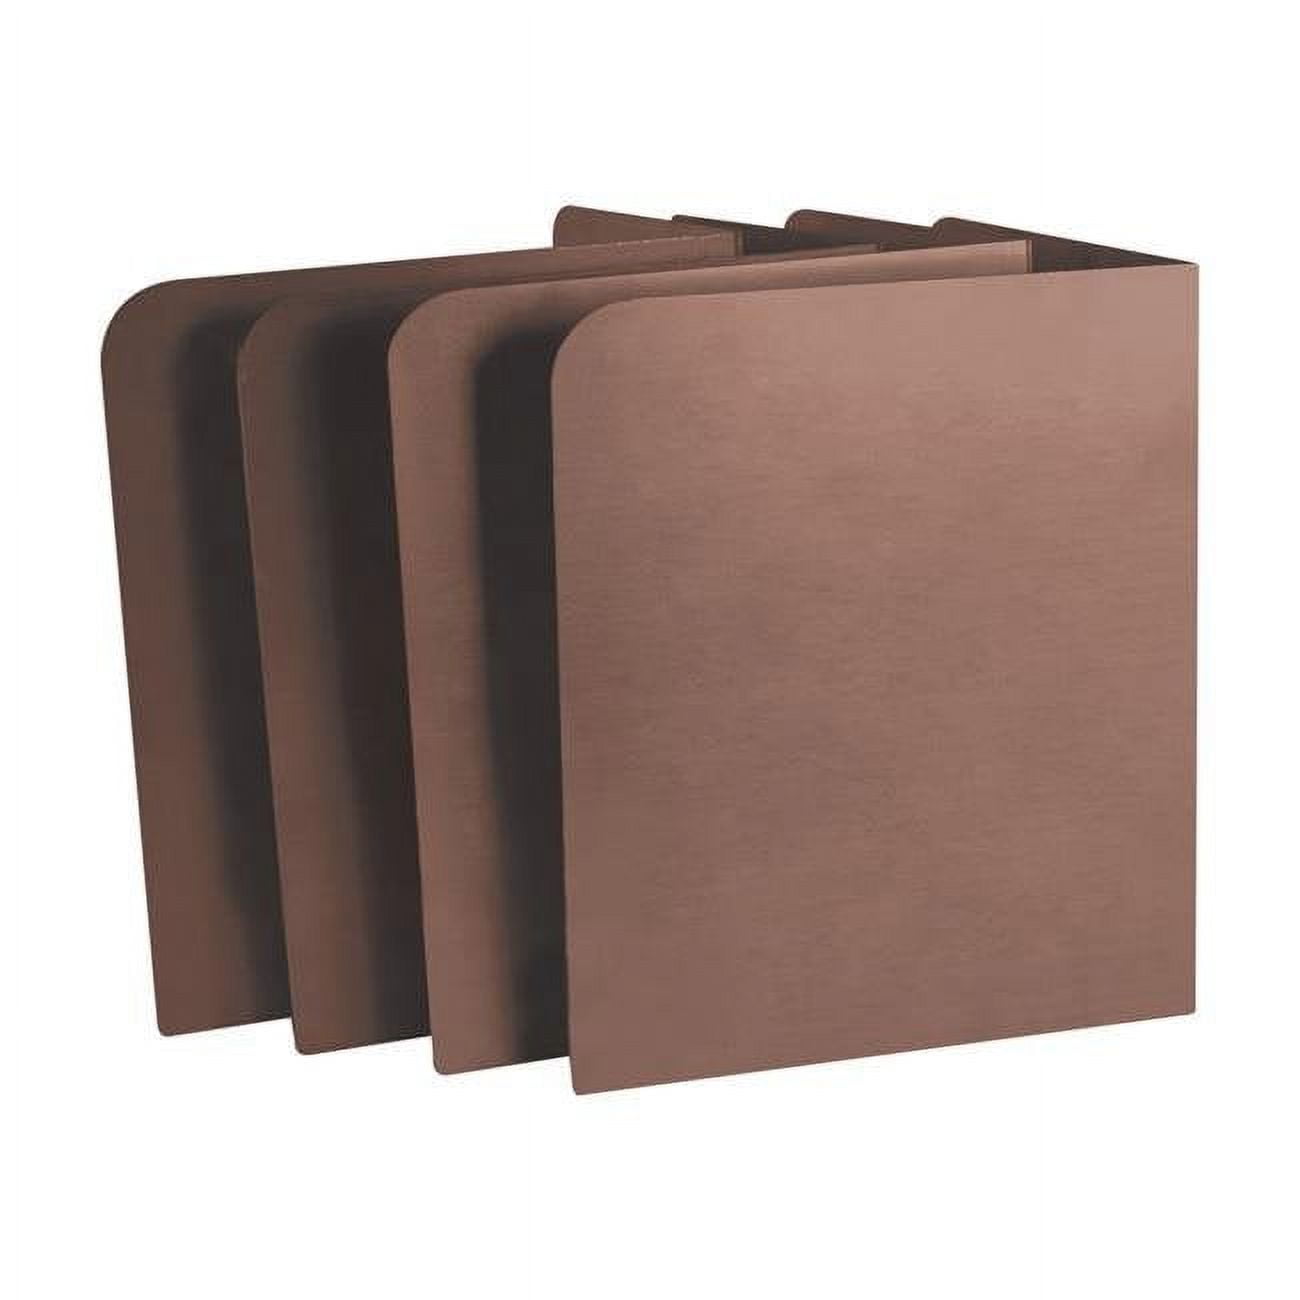 Picture of Bond 7795446 10 x 9 in. Instabrace Brown Metal Raised Bed Brace - Pack of 4